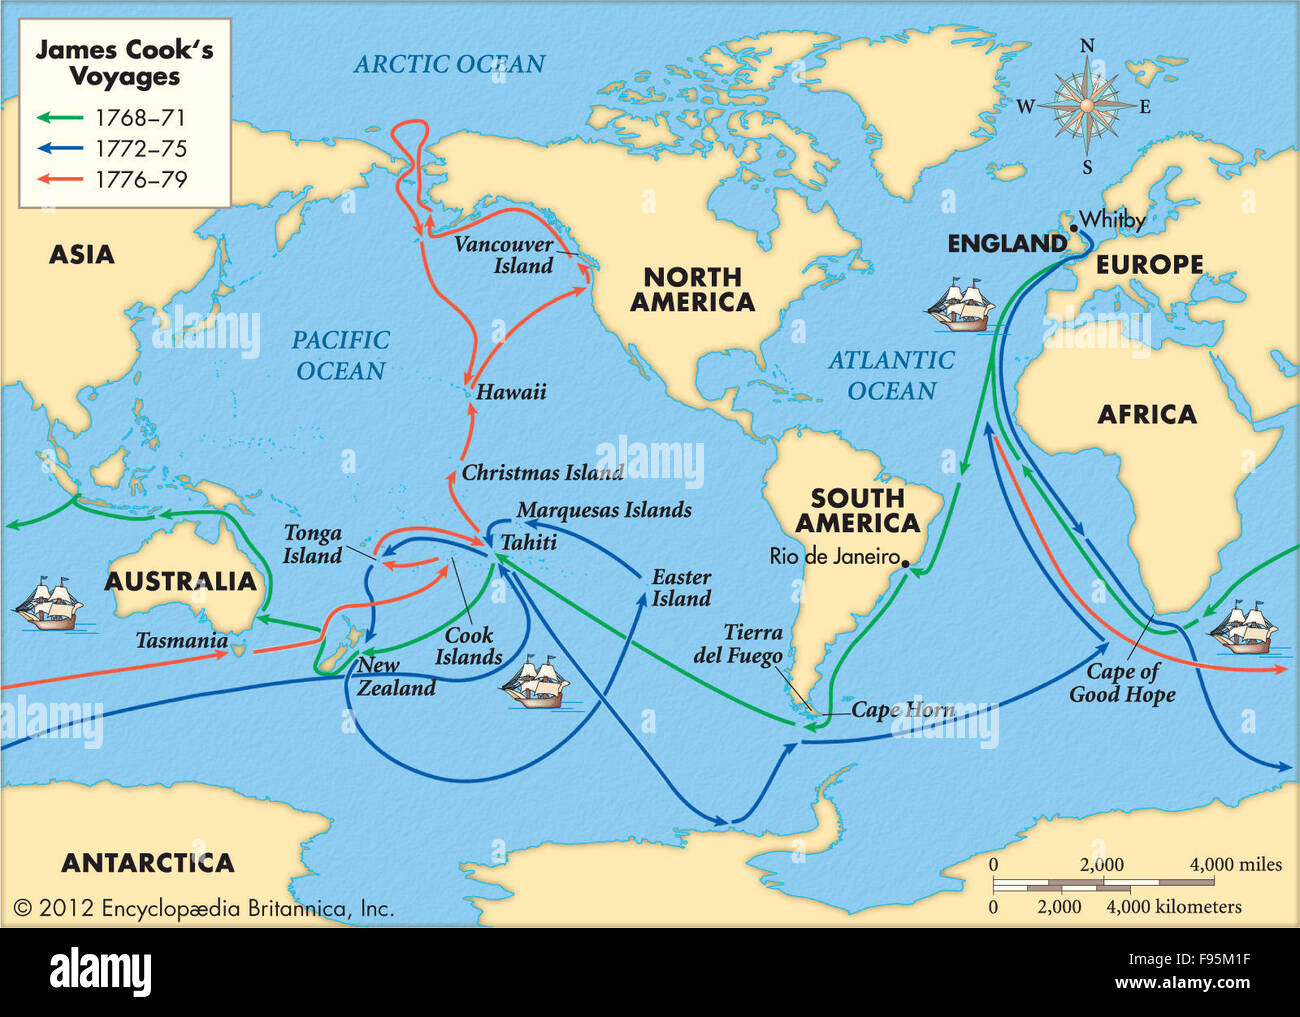 james cook pacific voyages